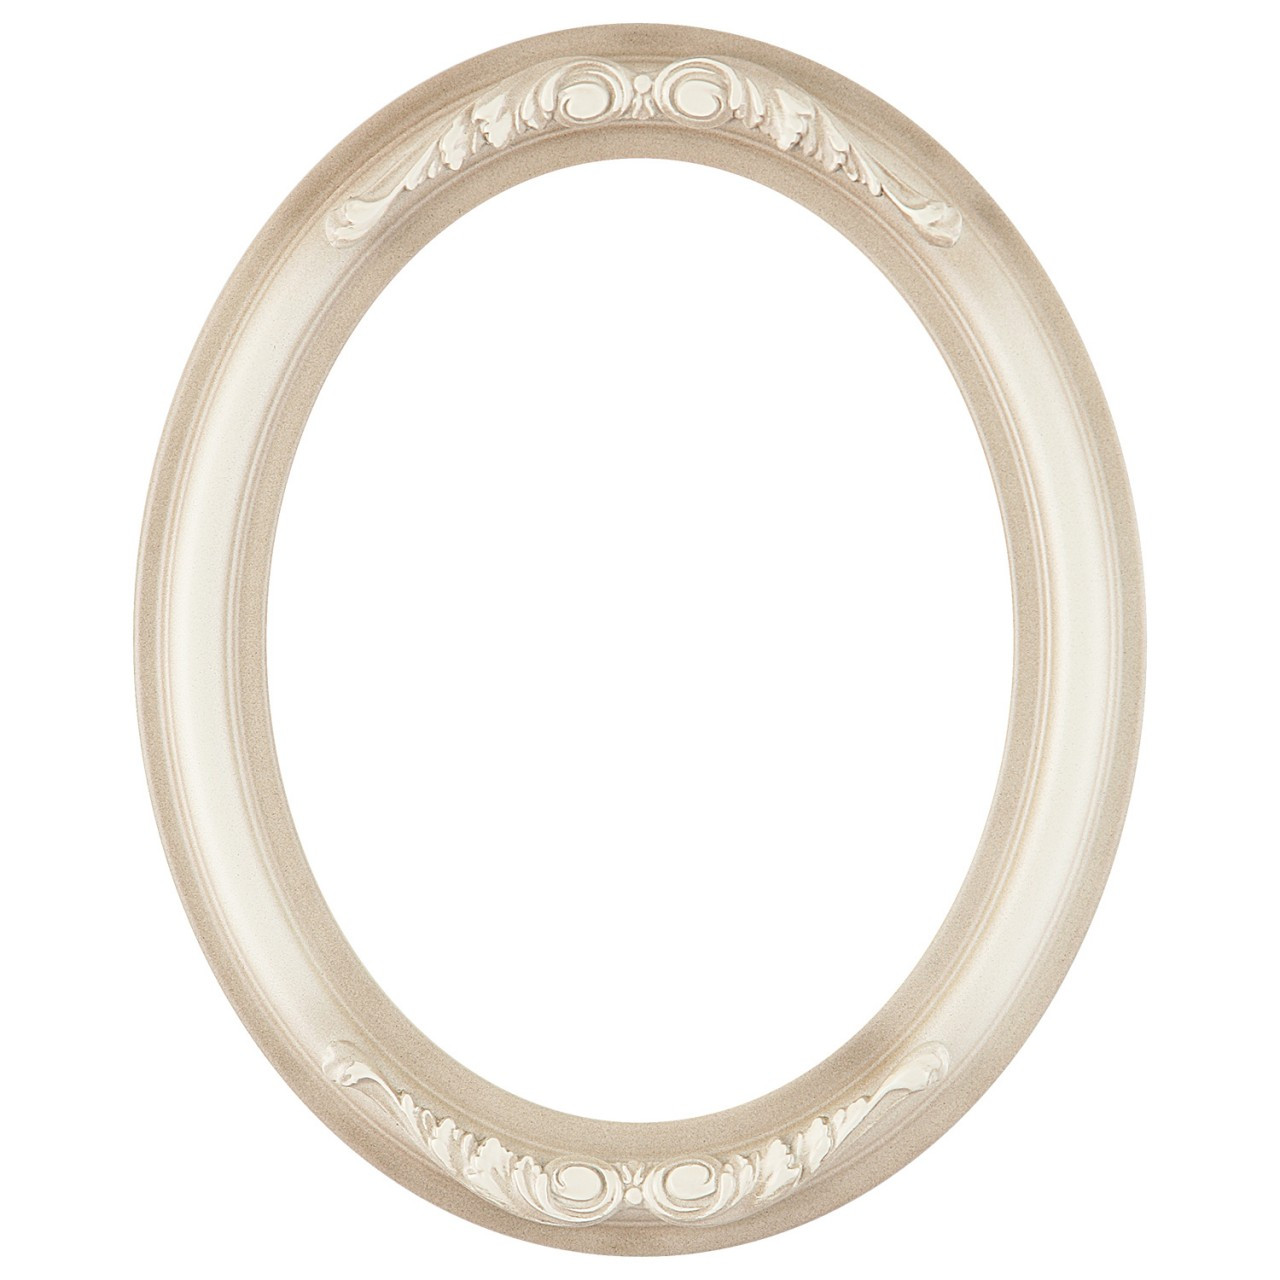 Oval Frame In Taupe Finish Vintage White Picture Frames With Ornate